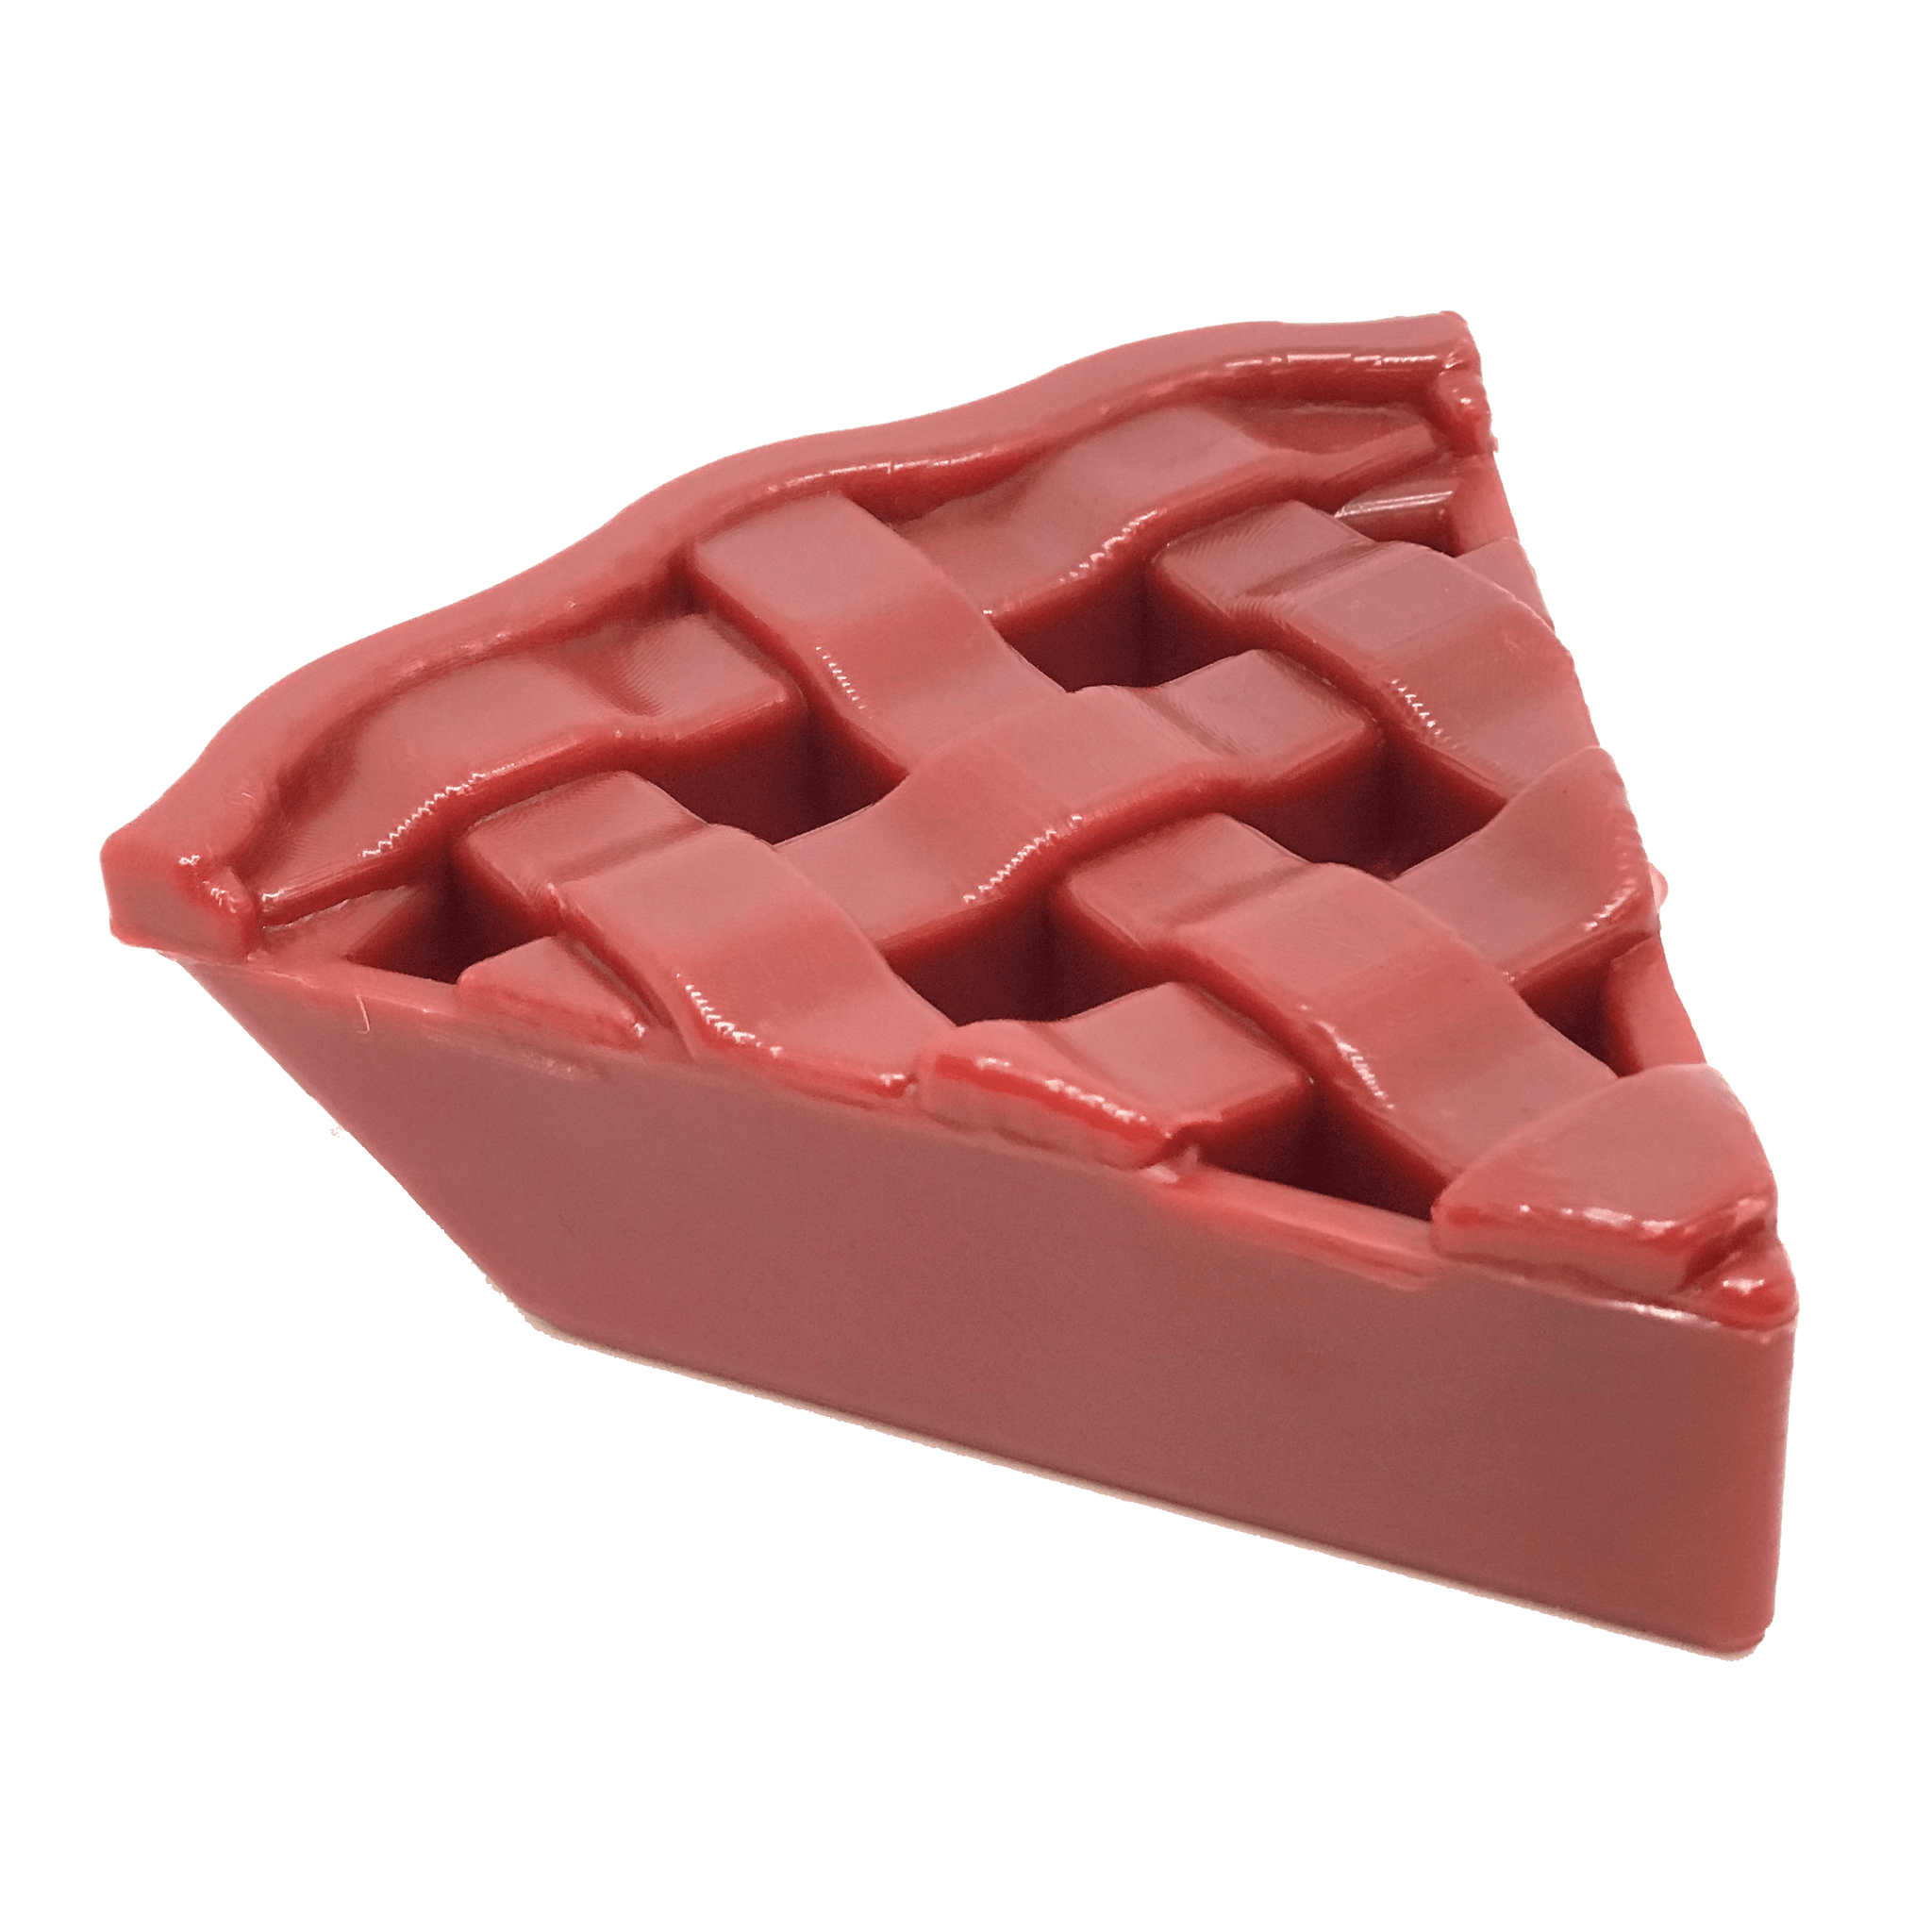 SP Cherry Pie Ultra Durable Nylon Dog Chew Toy and Treat Holder for Aggressive Chewers - Red - Cherry Pie - Red